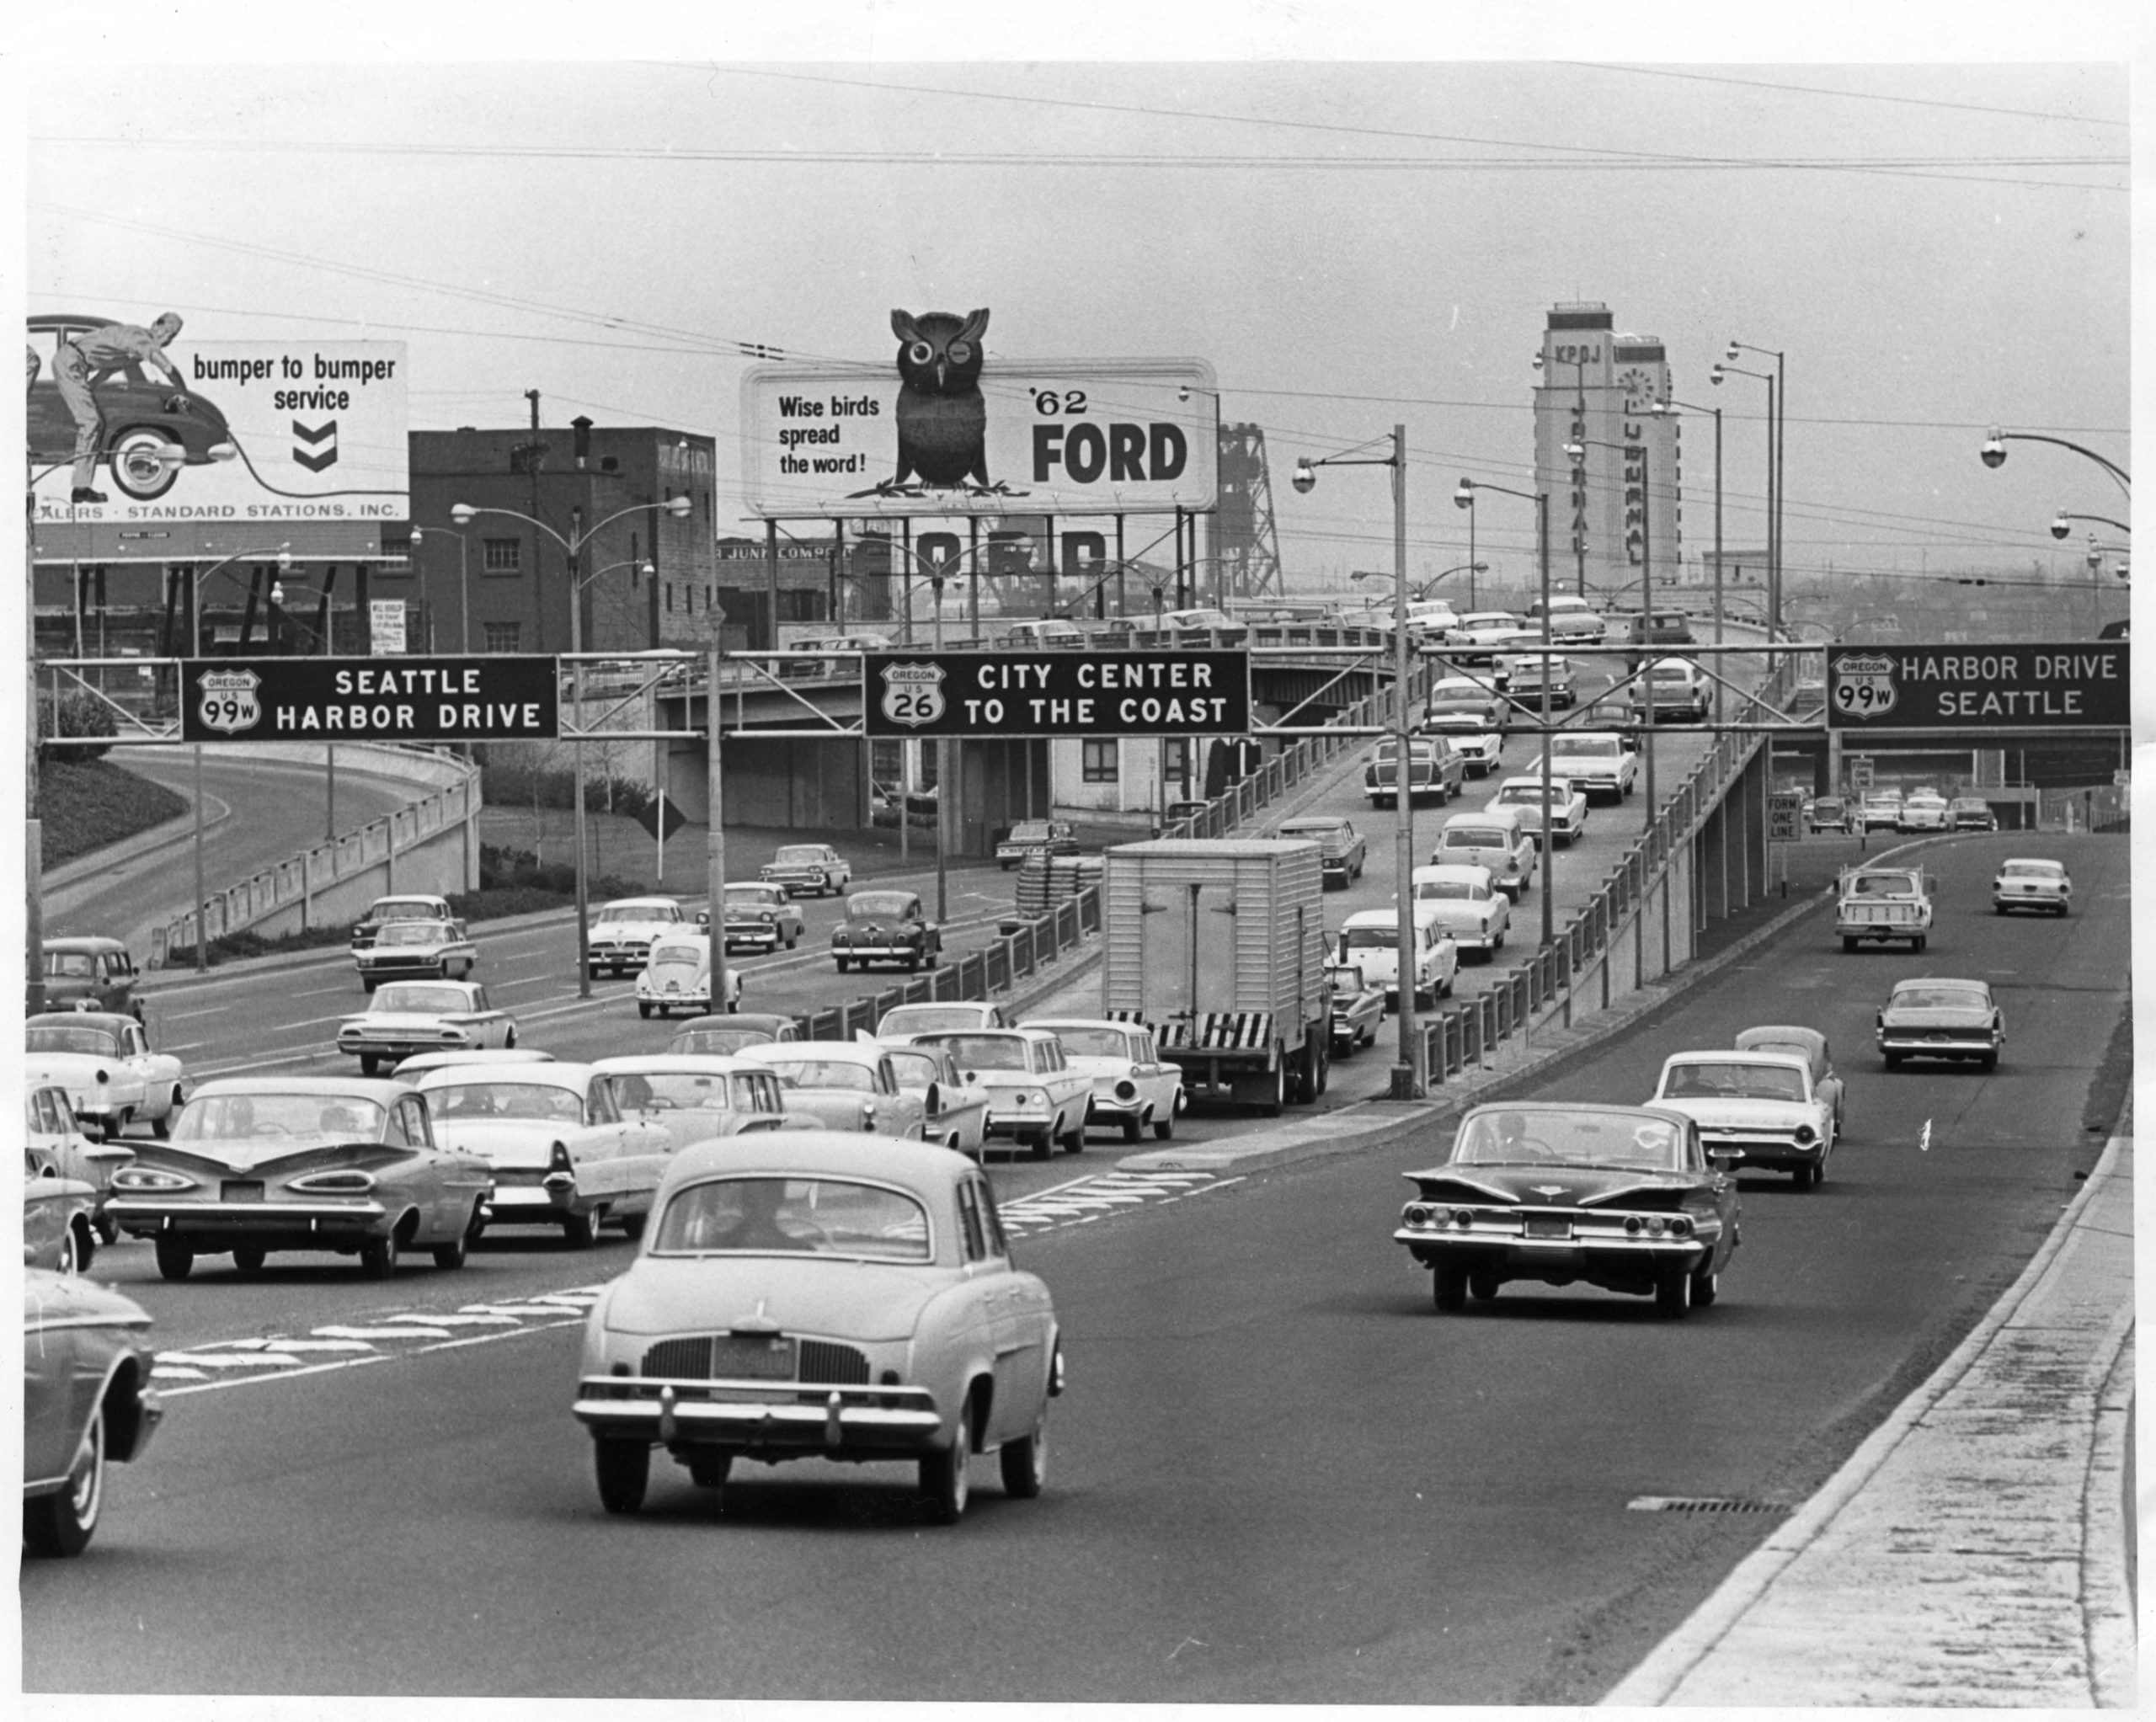 6 Freeway Removals That Changed Their Cities Forever